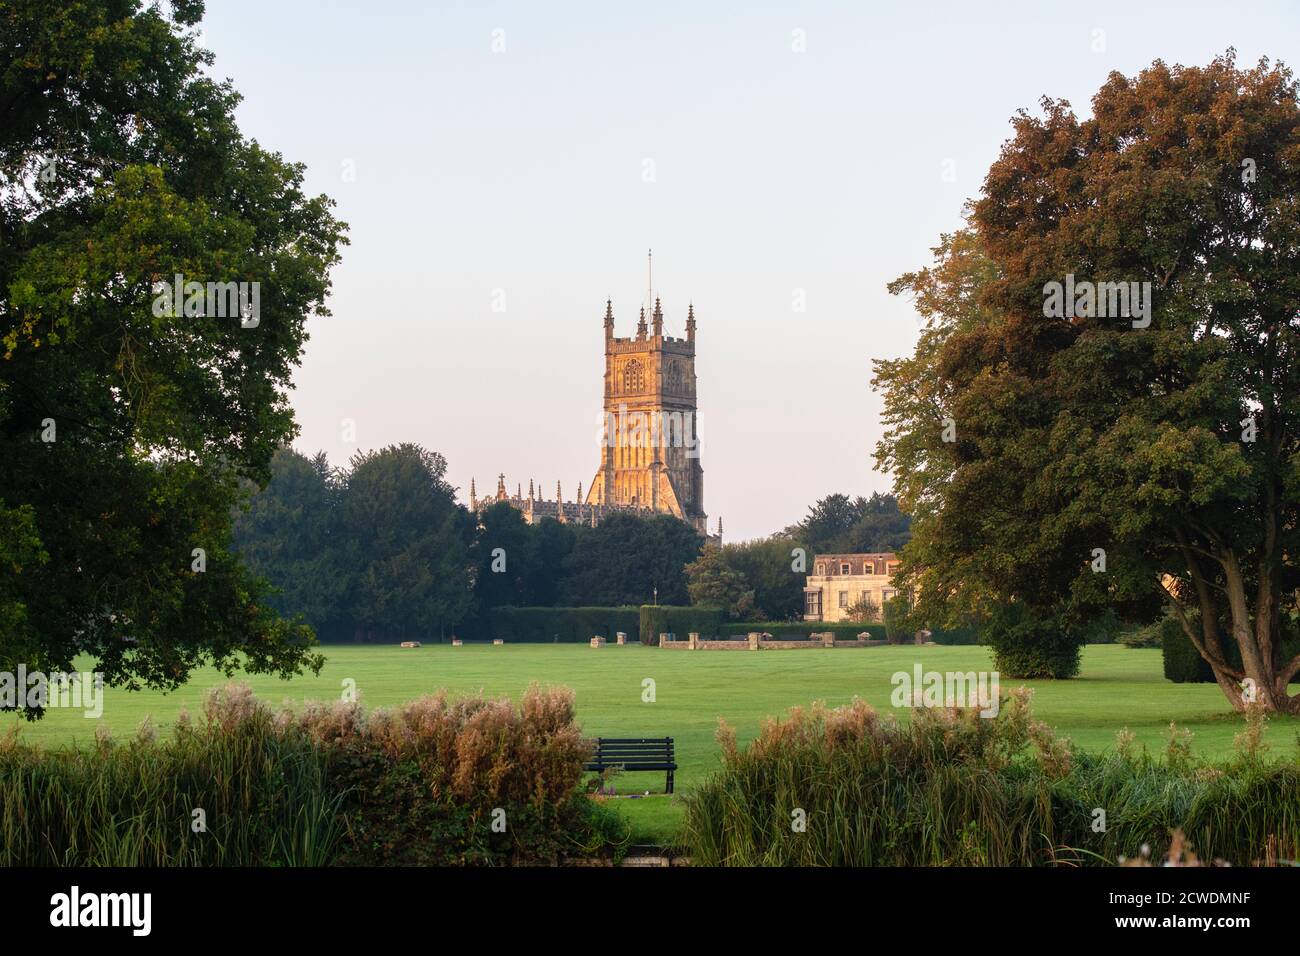 The Church of St. John the Baptist from the abbey grounds at sunrise. Cirencester, Cotswolds, Gloucestershire, England Stock Photo